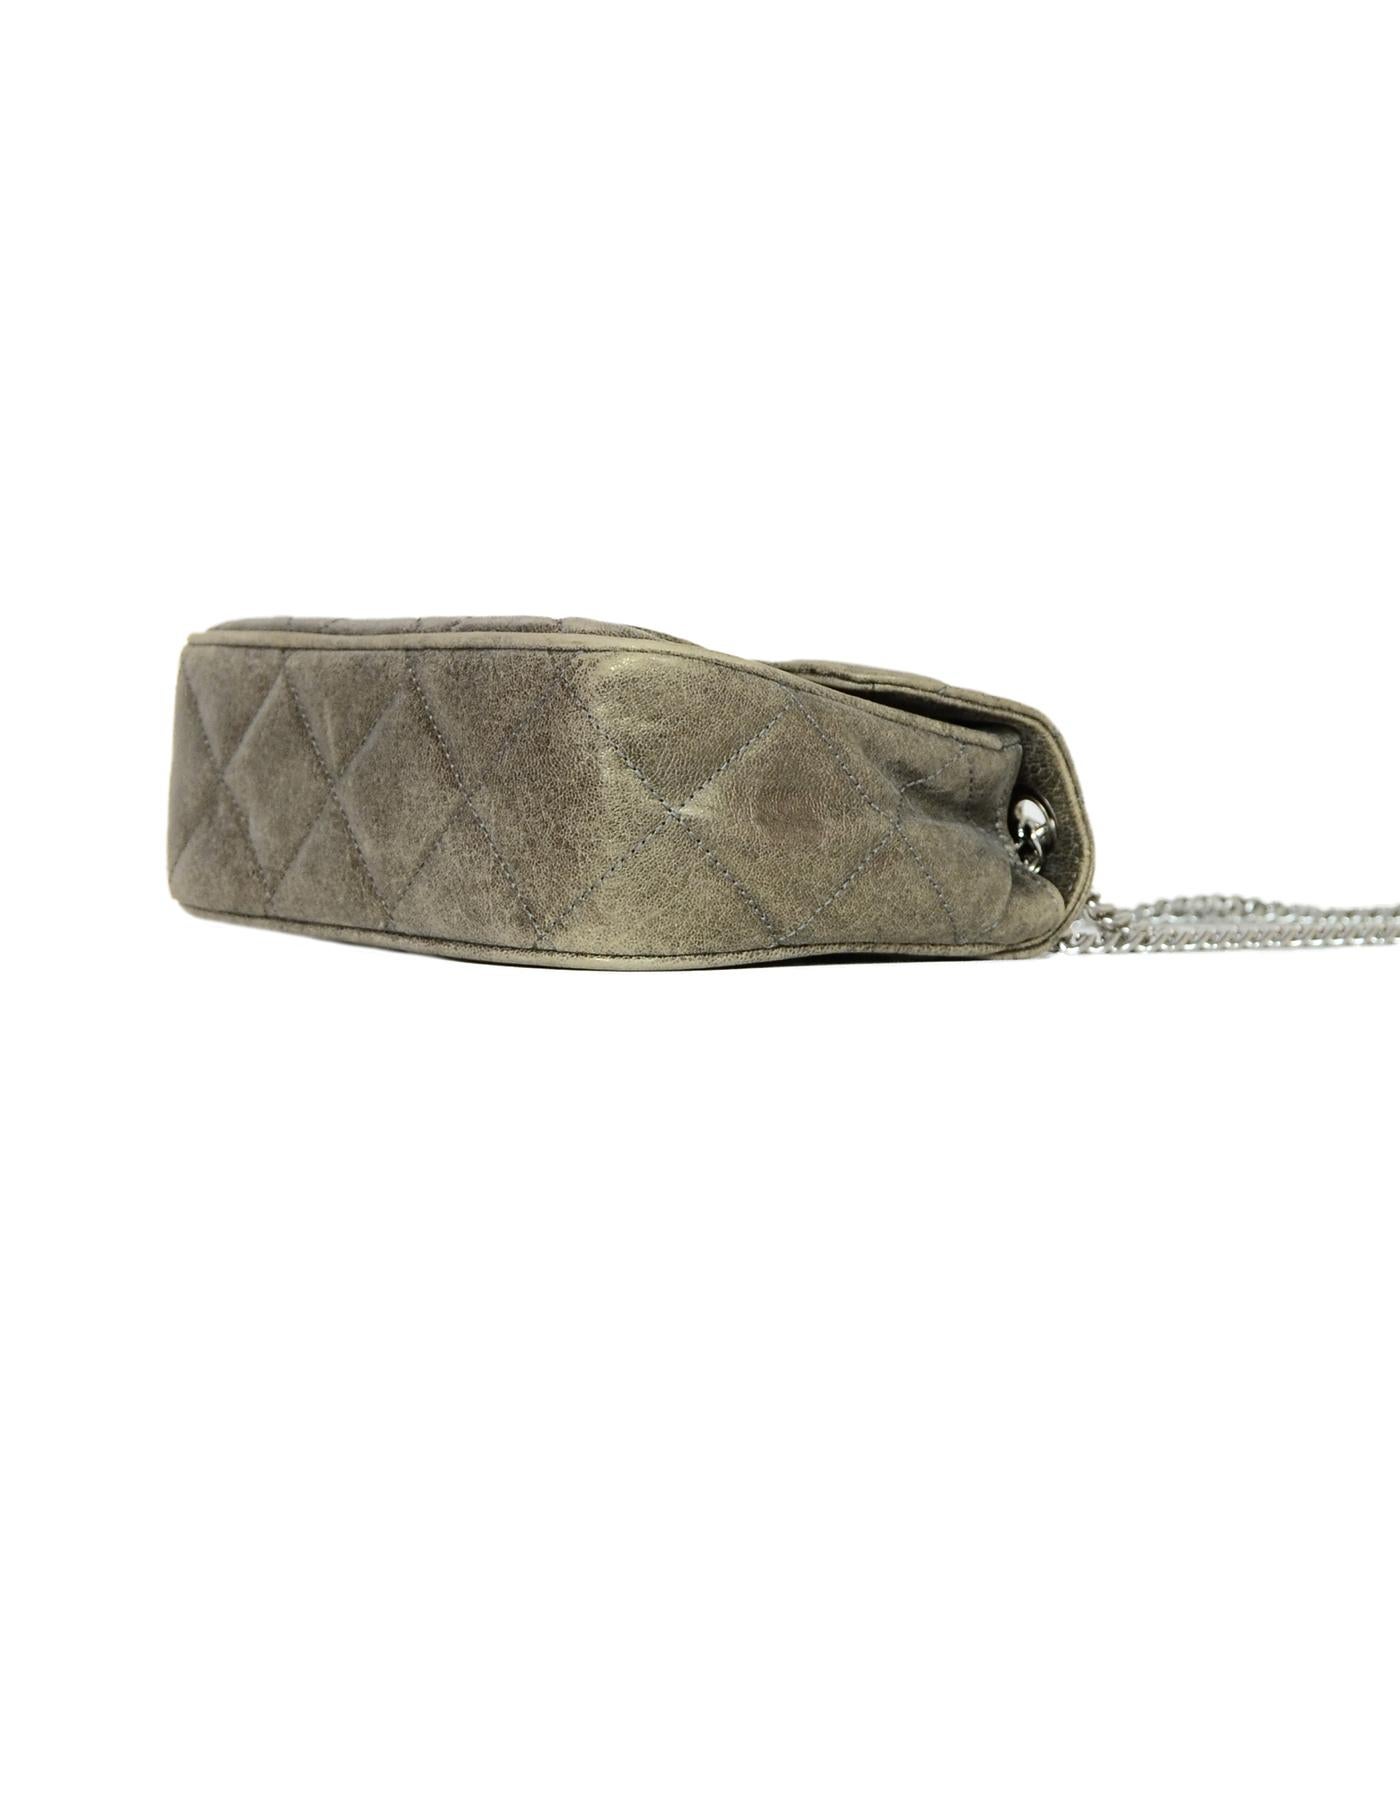 Michael Kors Sueded Leather Distressed Metallic Quilted Sloan Flap Crossbody Bag In Excellent Condition In New York, NY